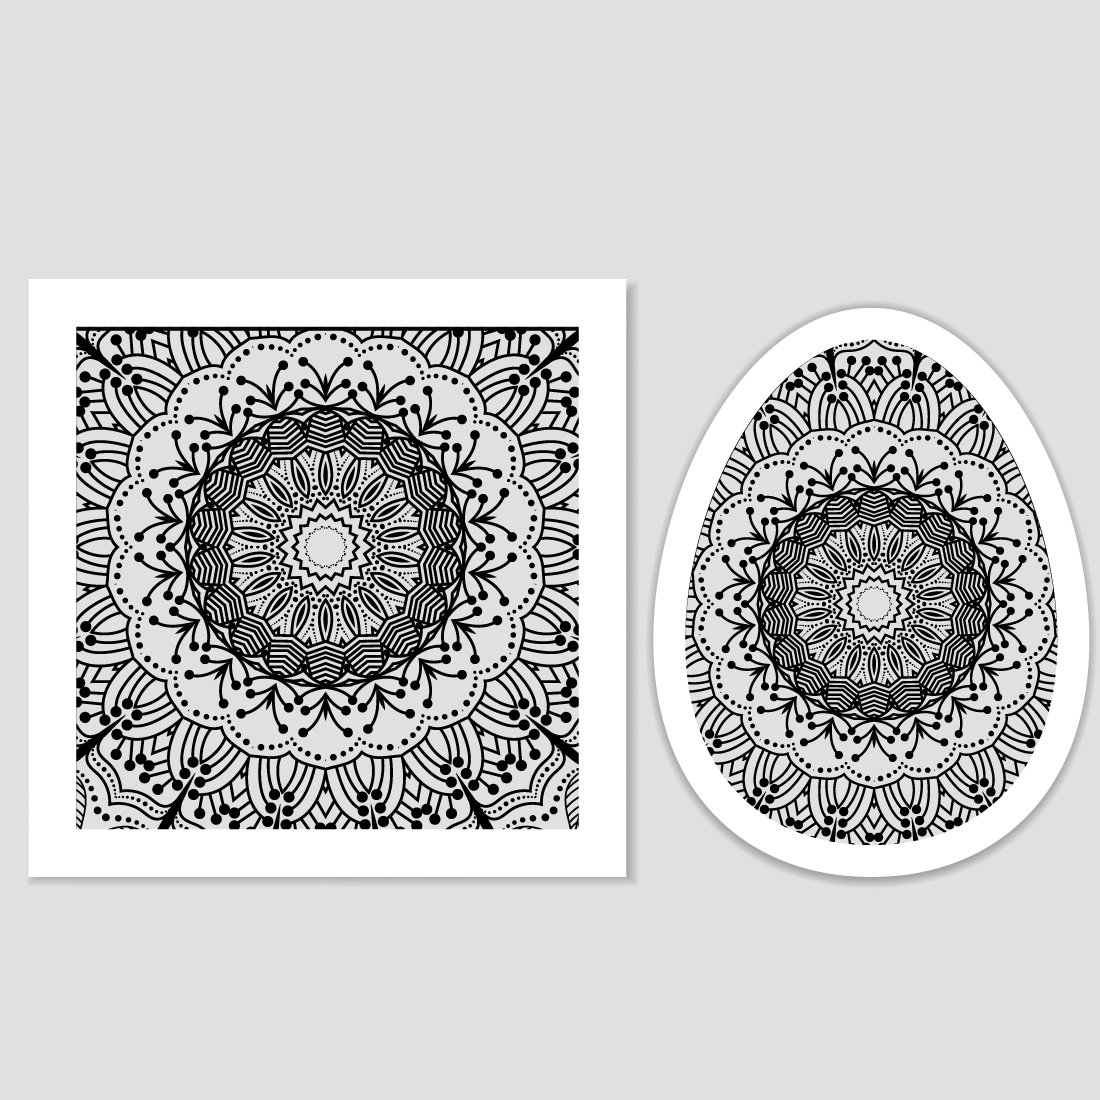 Mandala Background. Vintage Pattern With Round Ornament, Decorative Cover.